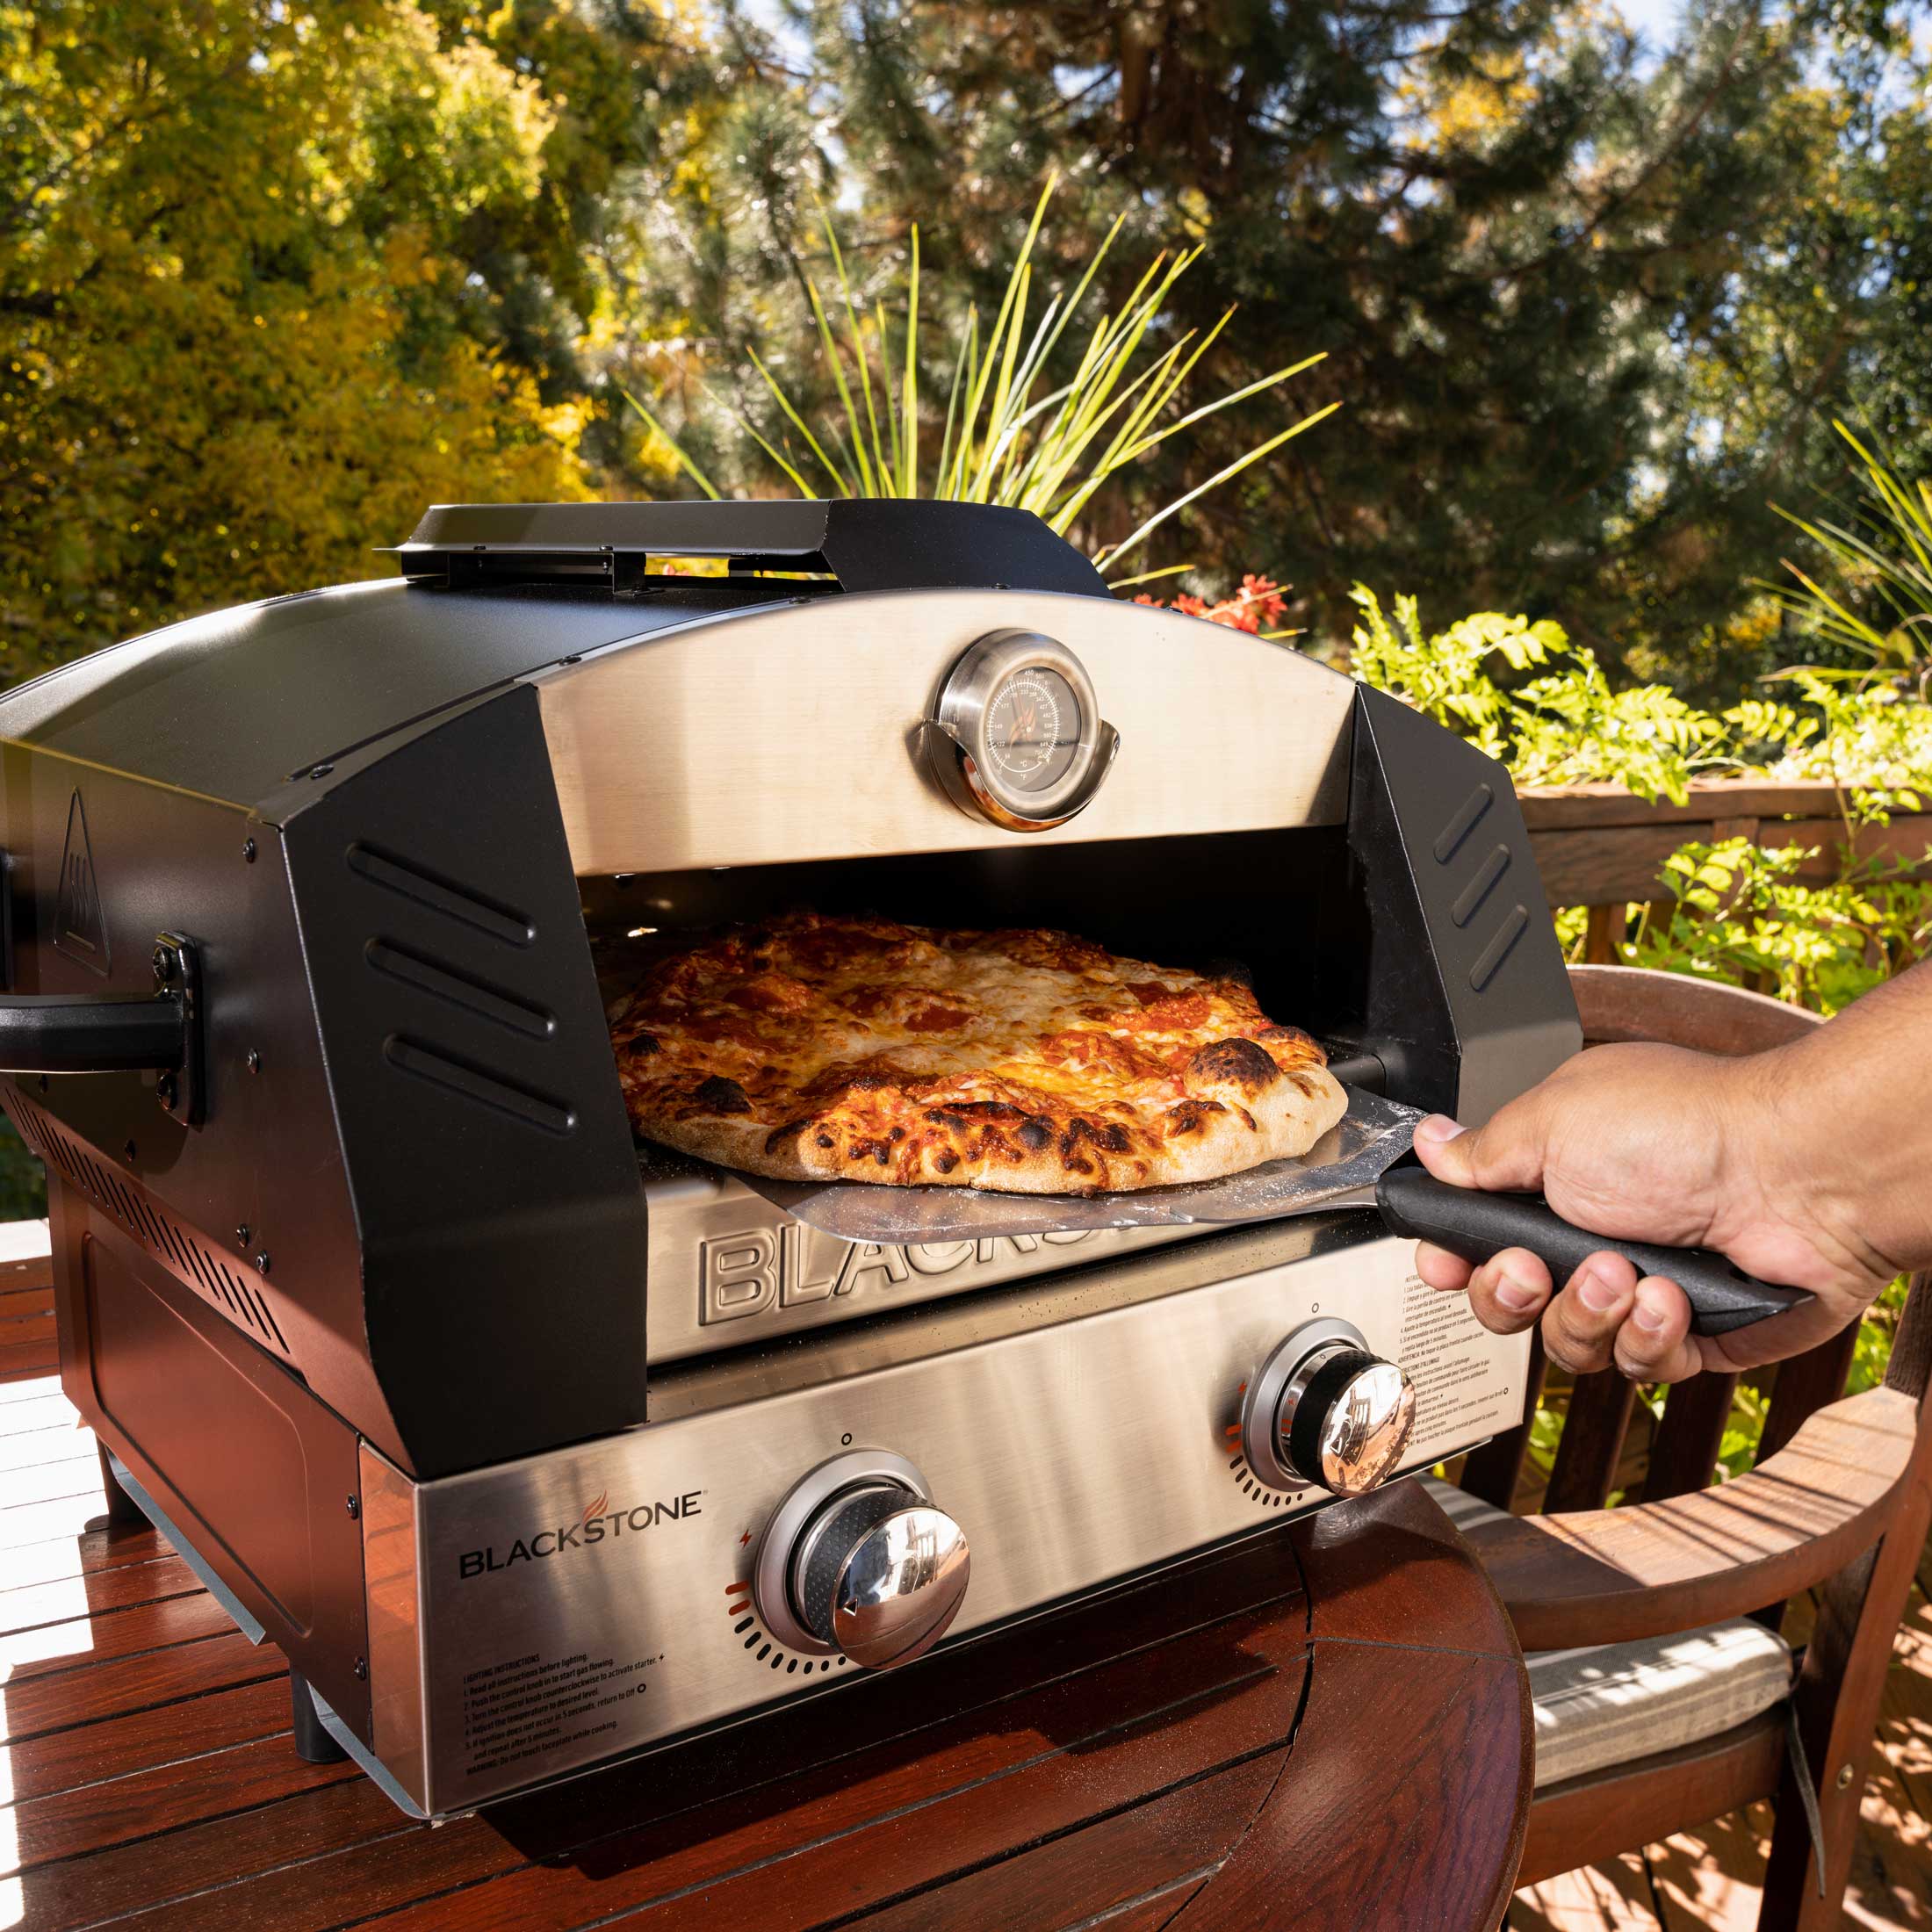 Propane Assist Pizza Oven Pro BBQ Grill Smoker Grill Trailer Food